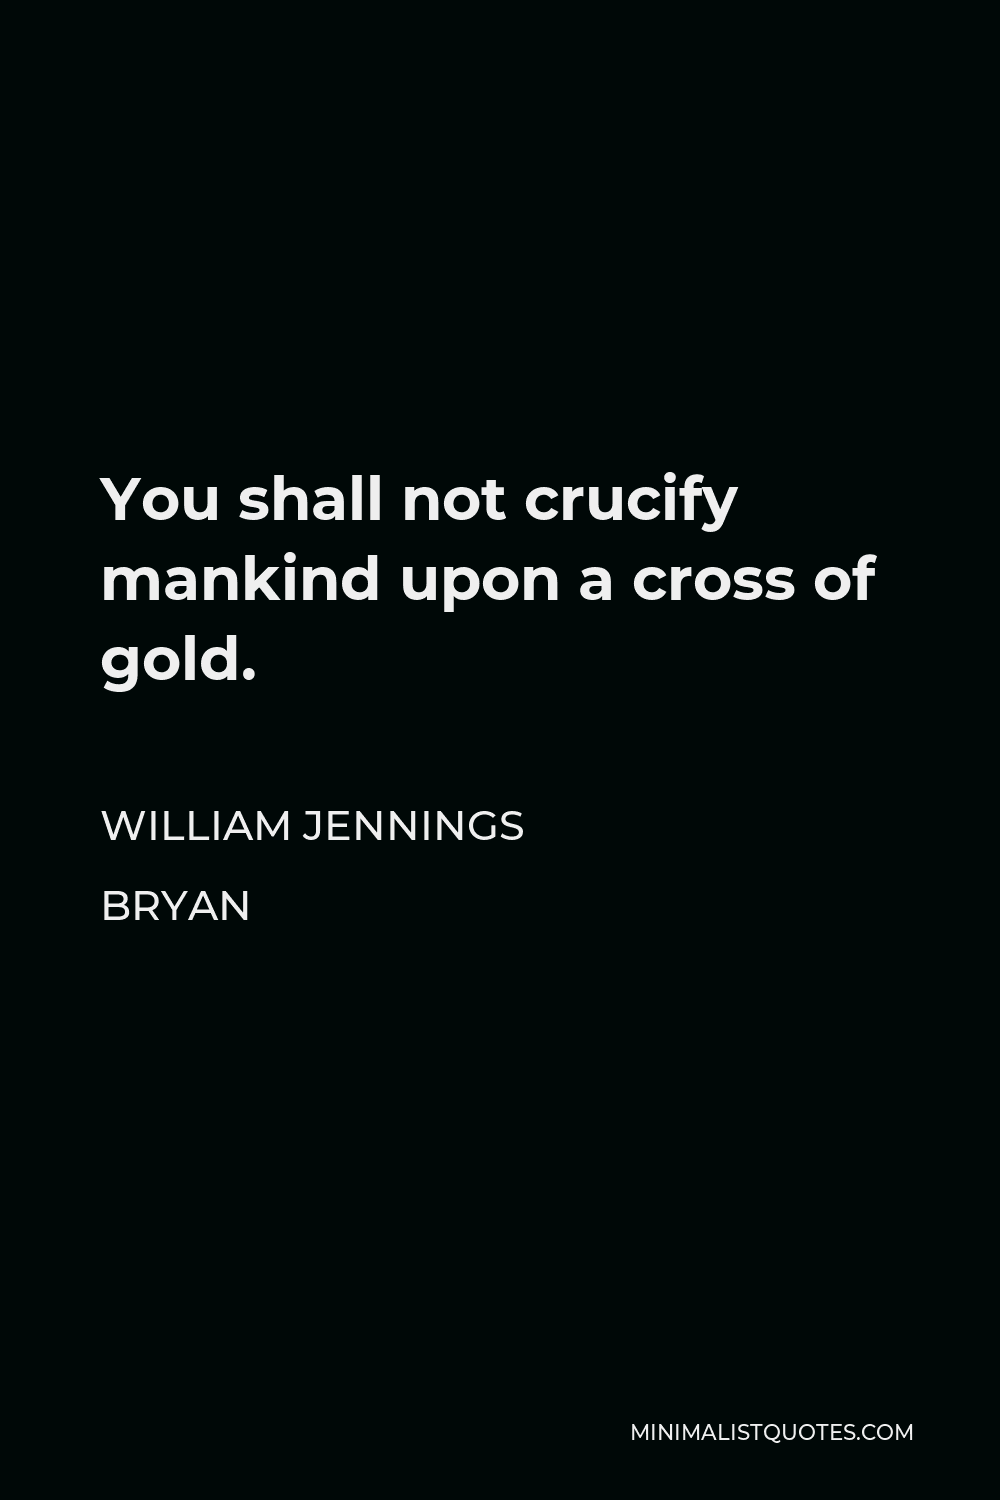 William Jennings Bryan Quote - You shall not crucify mankind upon a cross of gold.